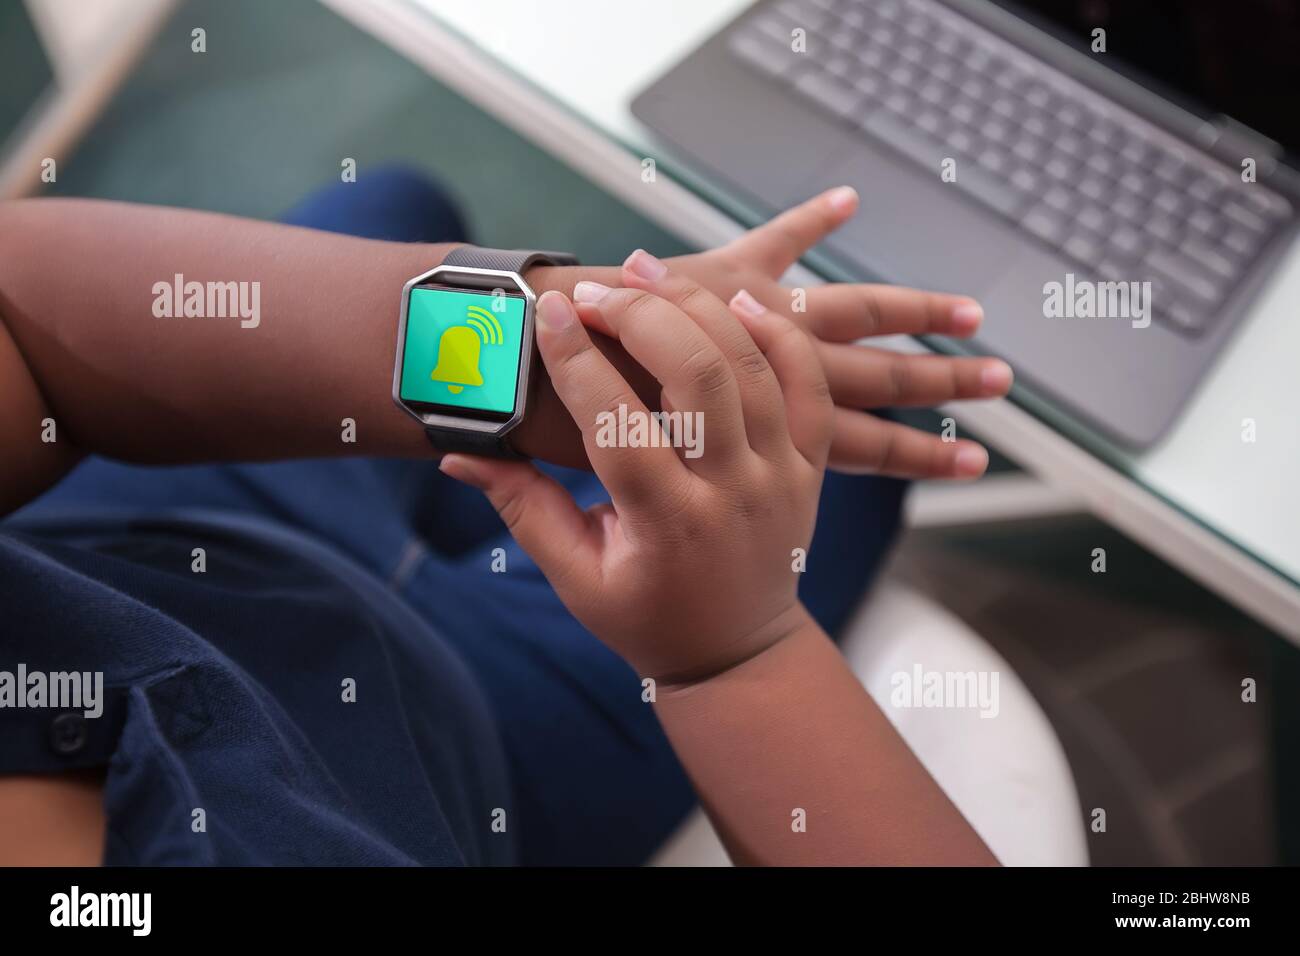 A student sitting at a desk looks at wristwatch alarm to pace and time manage. Stock Photo